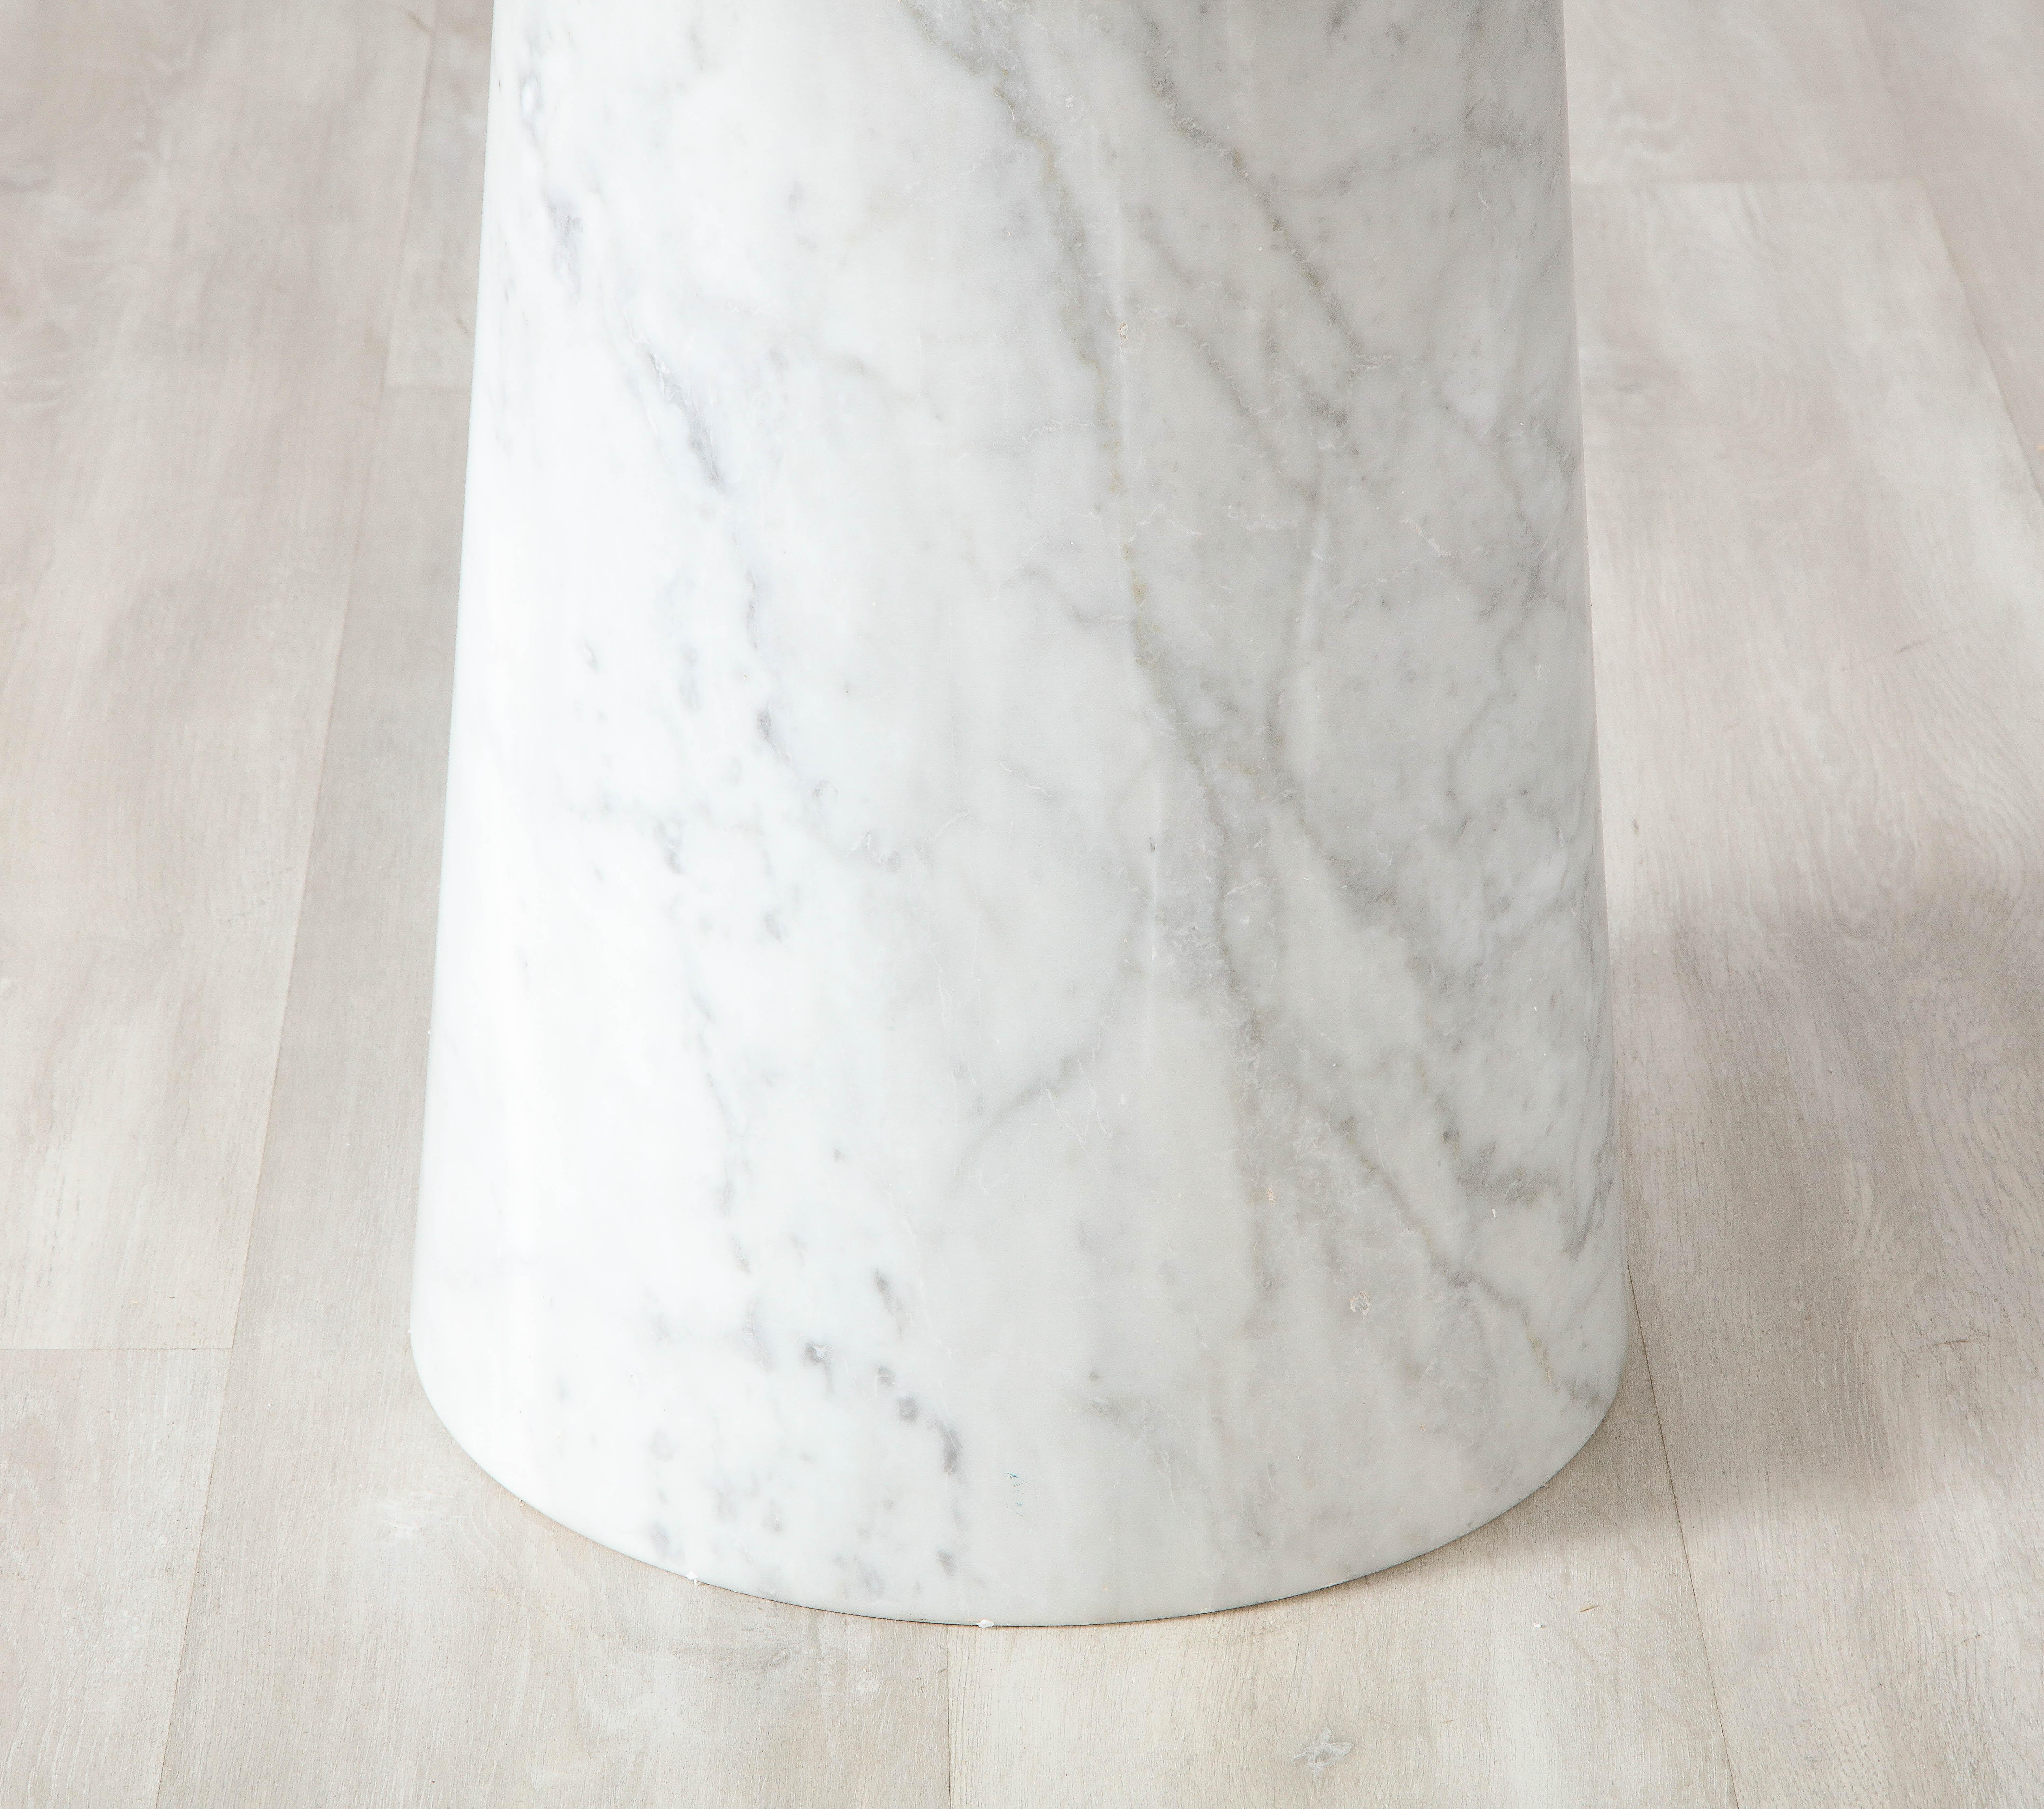 Angelo Mangiarotti Carrara Marble Pedestal Dining Table, Italian, 1970's In Good Condition For Sale In New York, NY